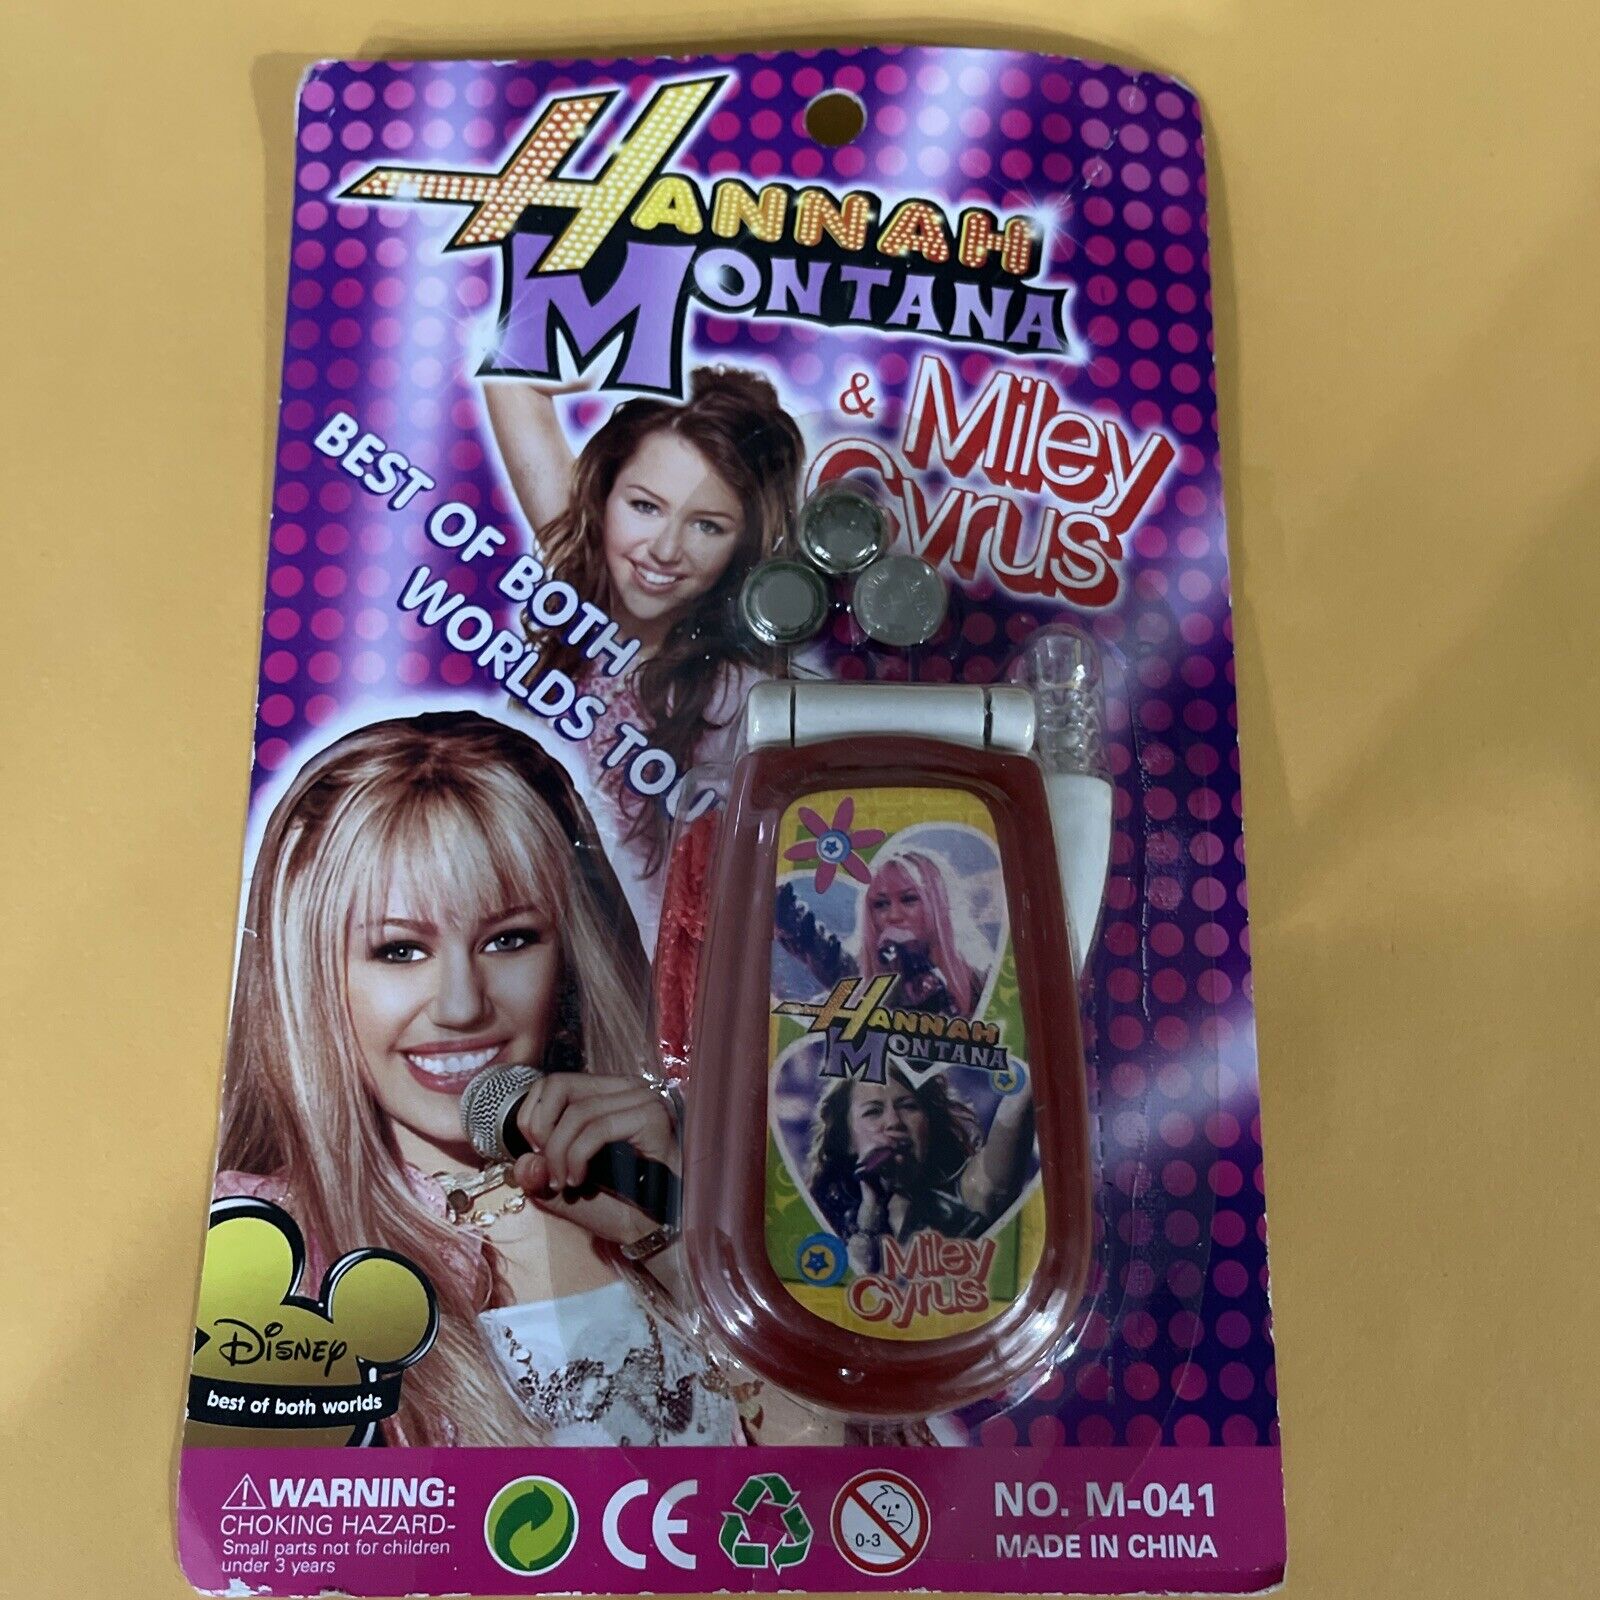 Vtg ‘09 Hannah Montana Miley Cyrus Toy Cell Phone Best Of Both Worlds Tour